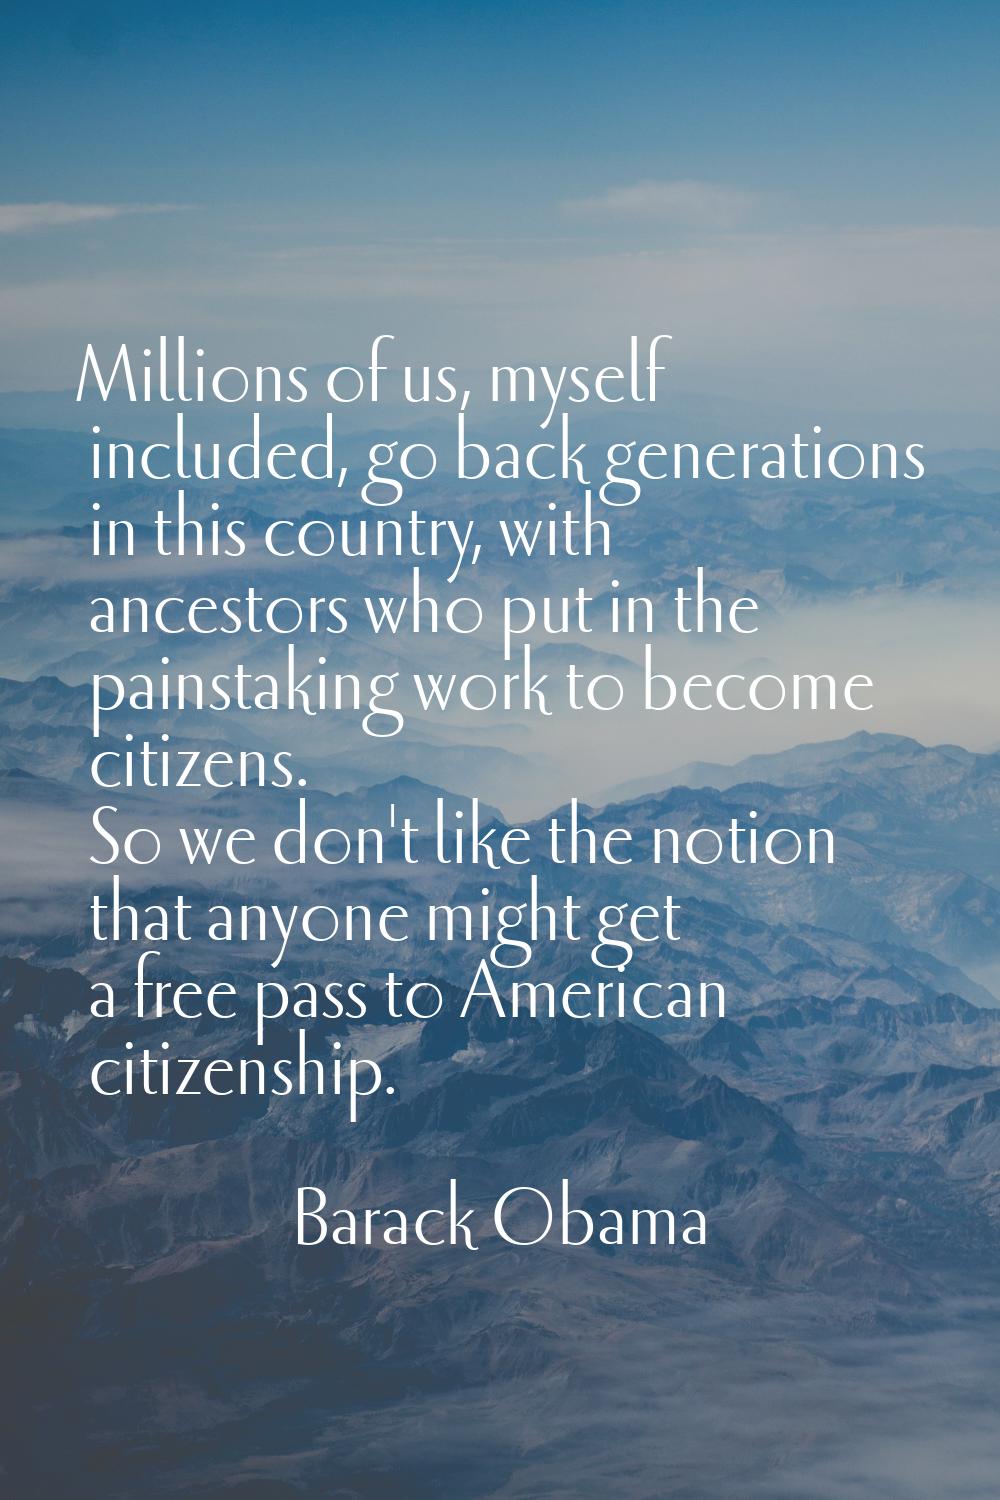 Millions of us, myself included, go back generations in this country, with ancestors who put in the